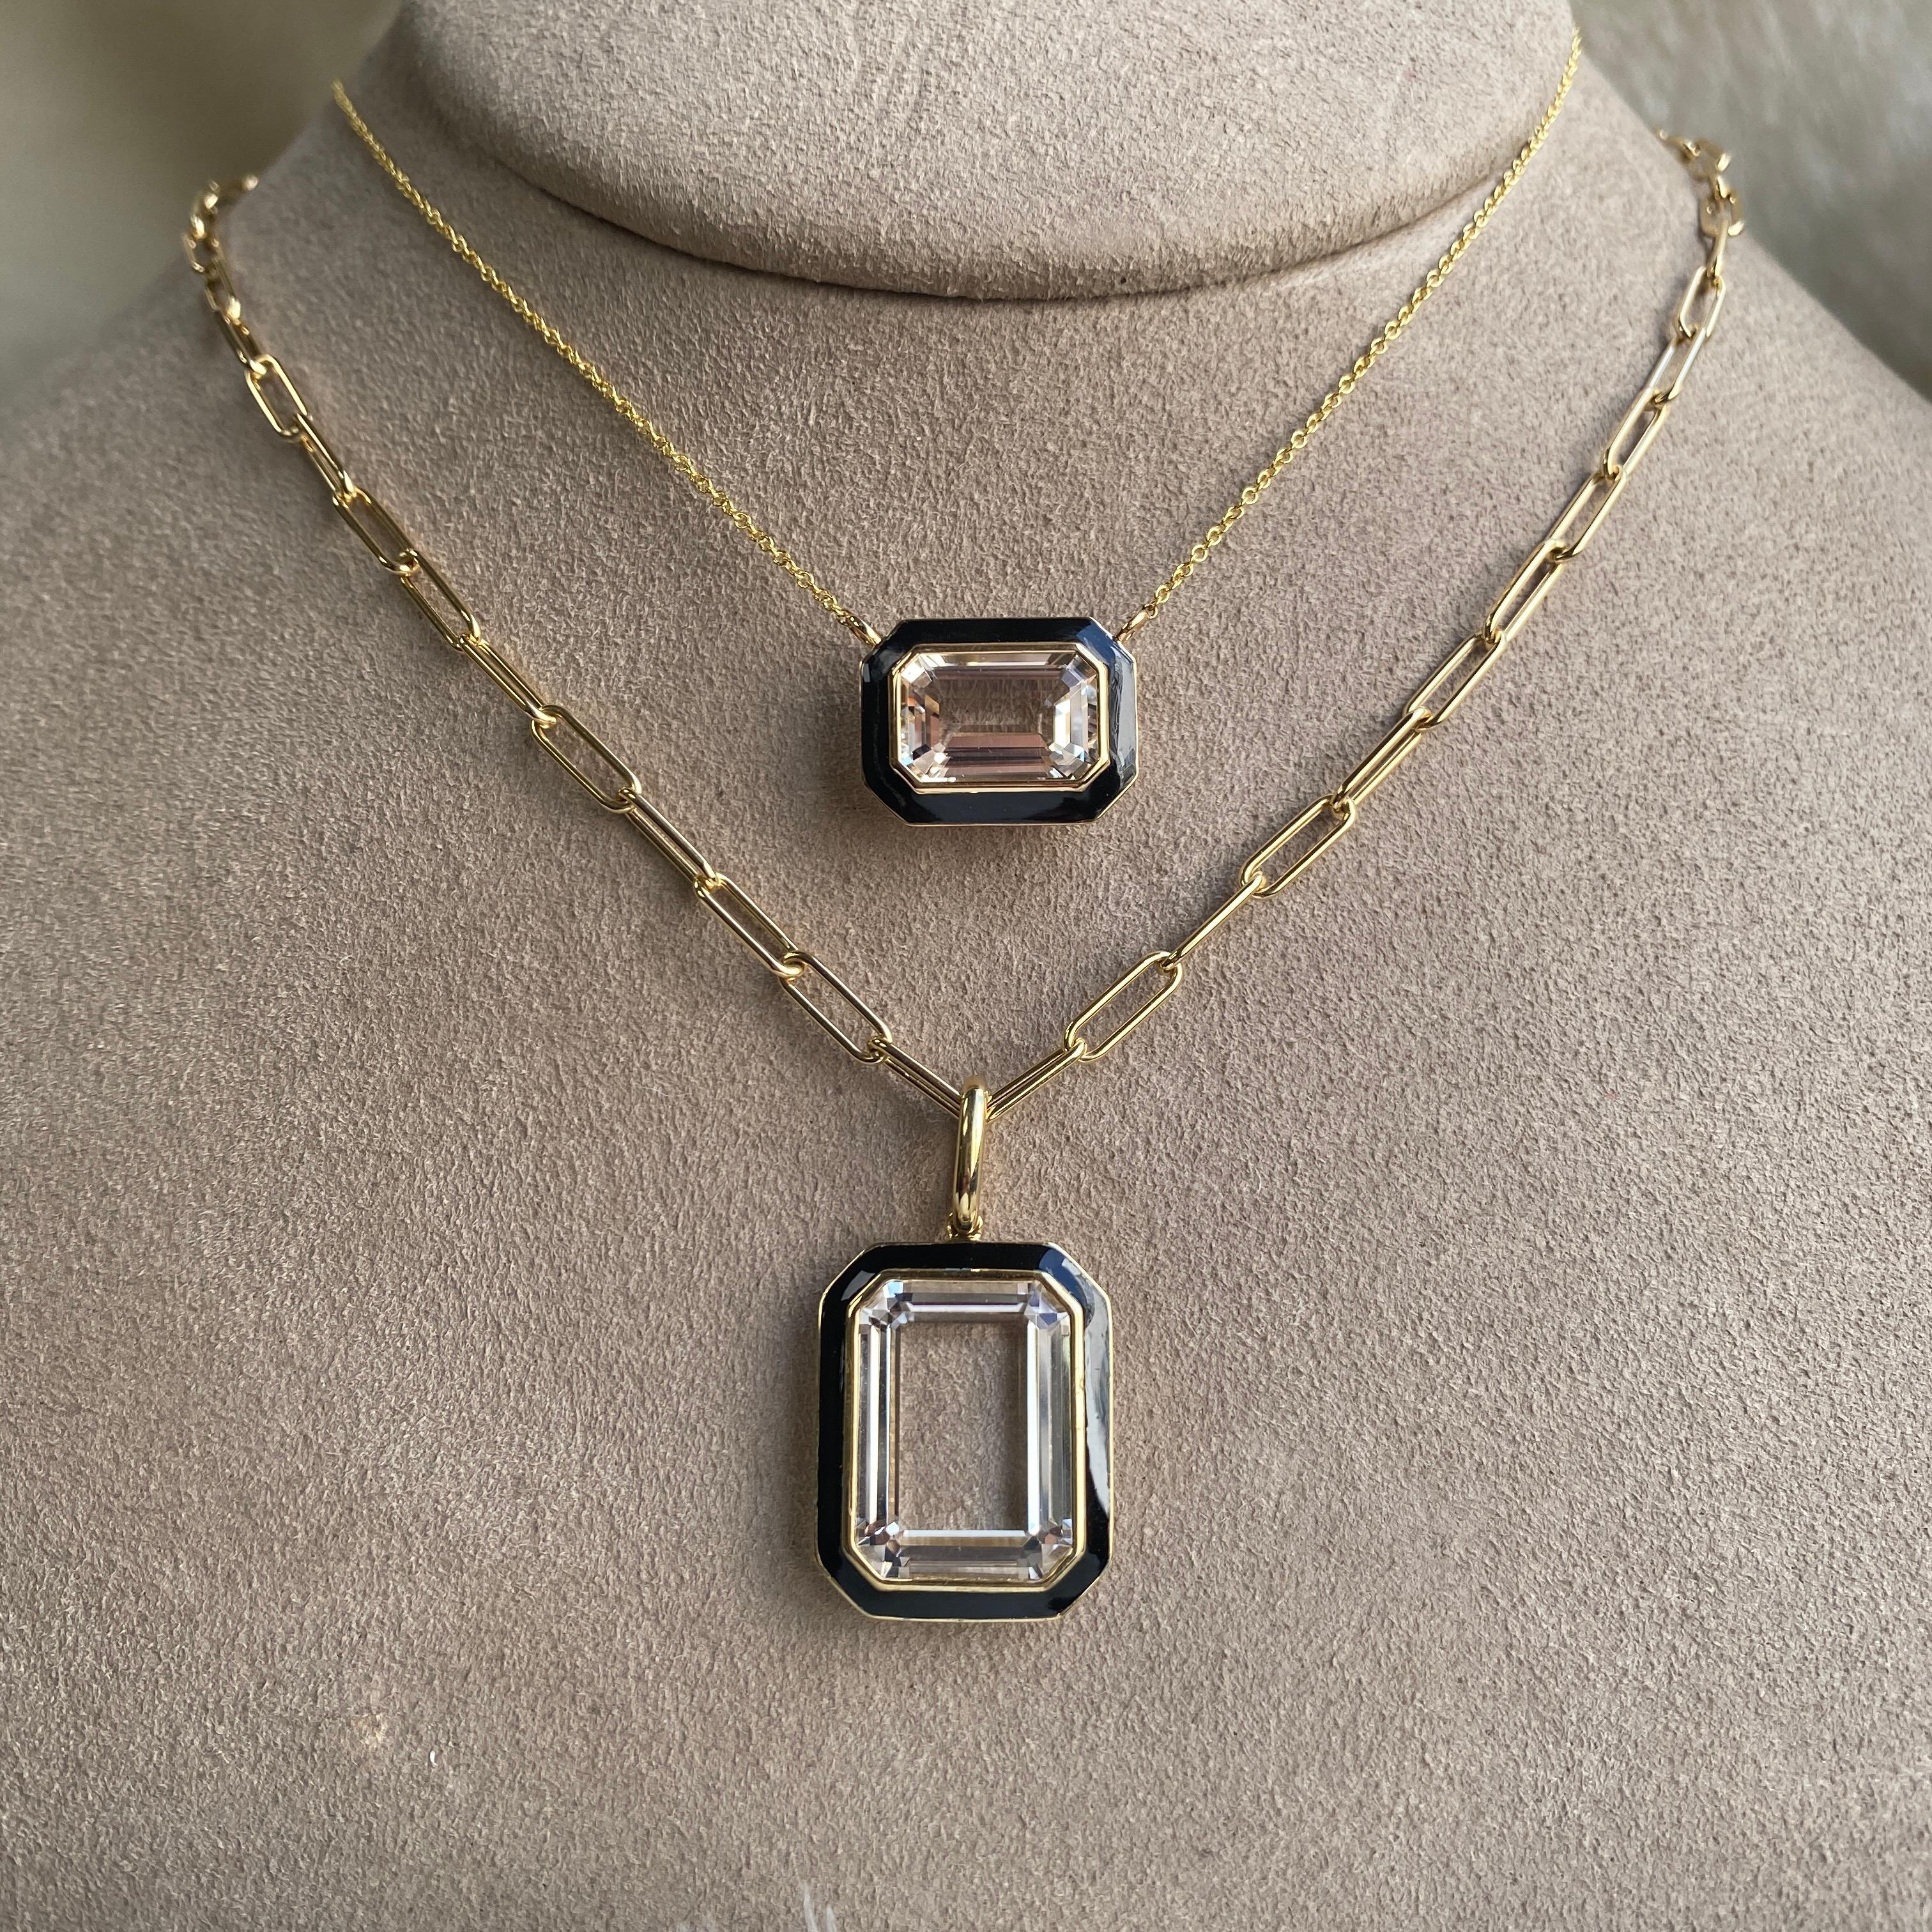 Part of our very new ‘Queen’ Collection, this classic and elegant pendant makes a bold statement and is great for day or night time.

Is a Rock Crystal Emerald Cut East-West Pendant with Black Enamel in the borders.

Our Queen Collection was